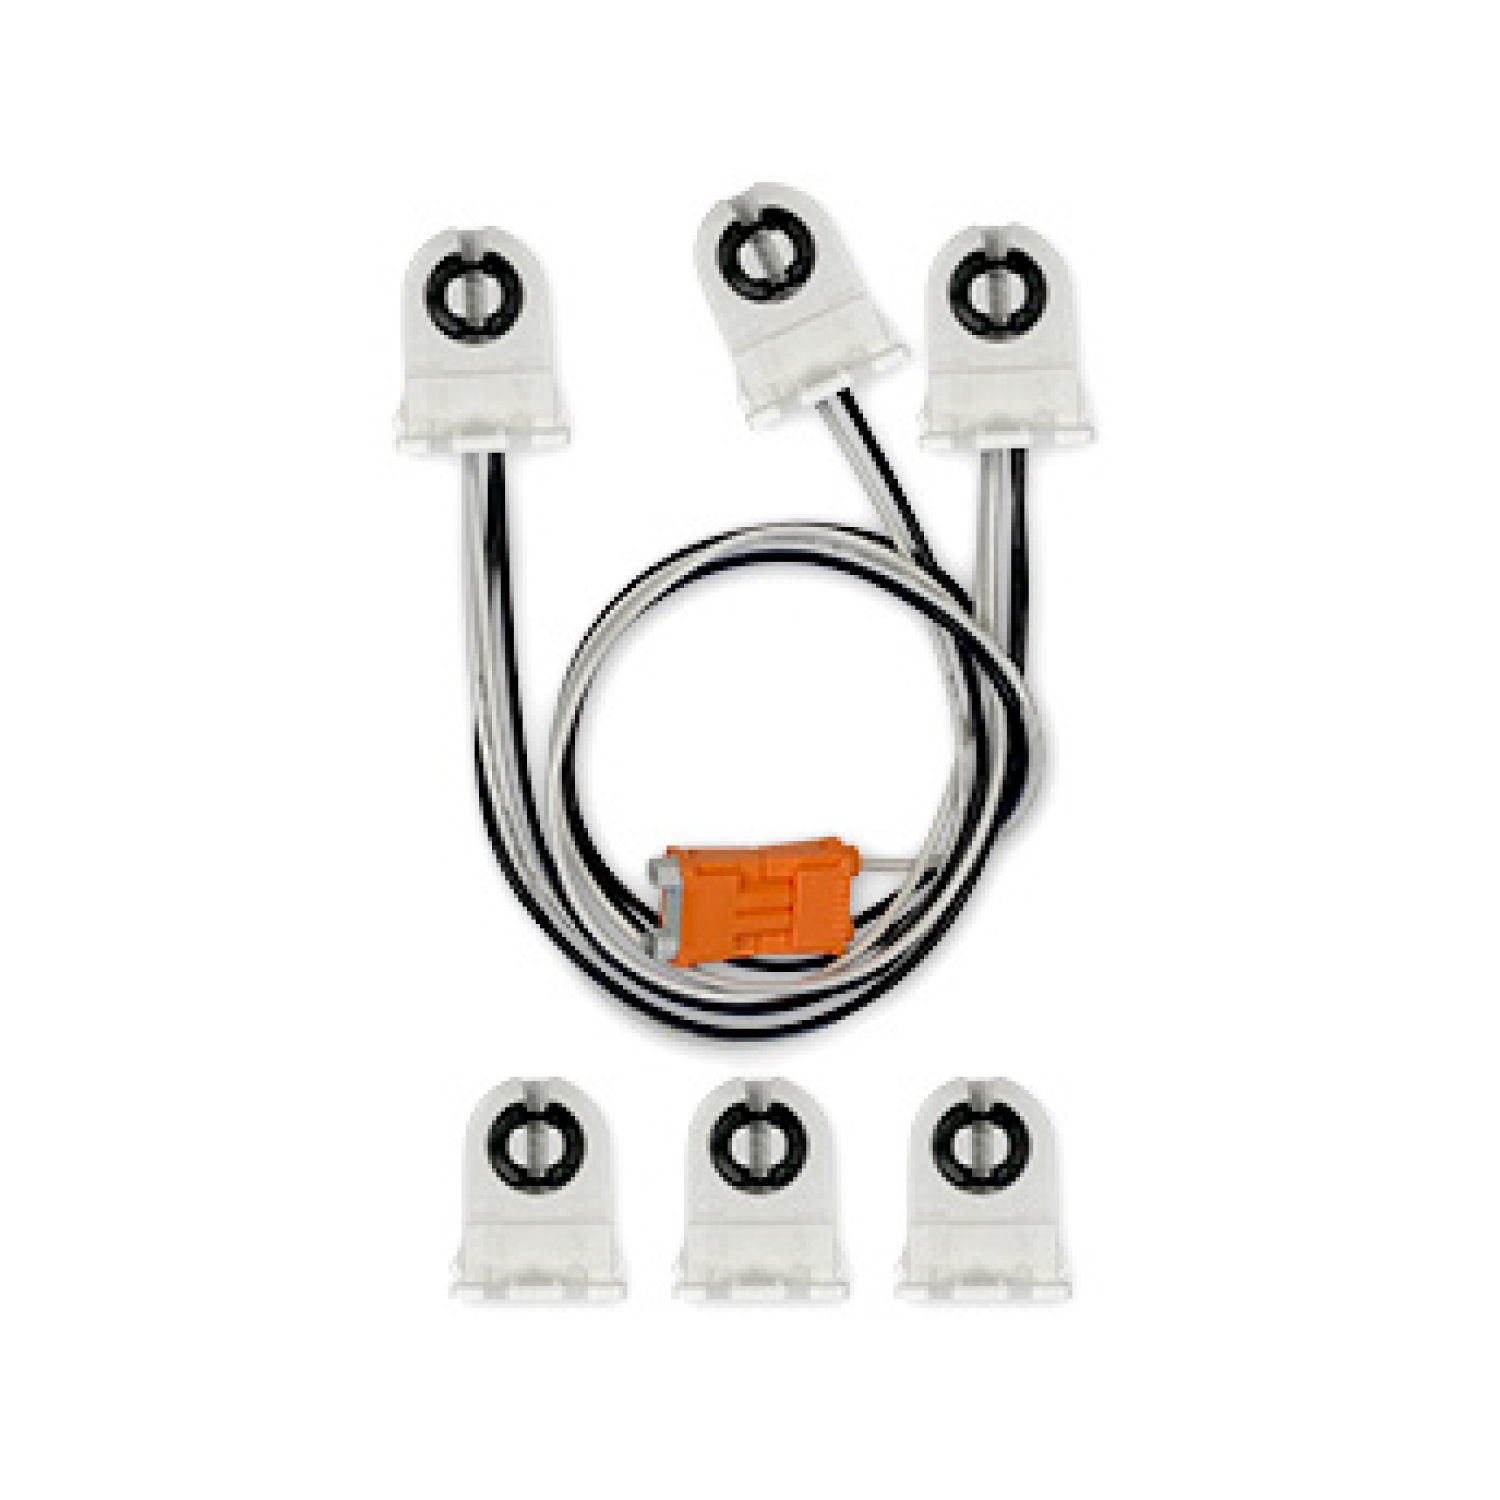 Wiring Harness for 3 Single-End, Non-Shunted Tombstones, T8/T12 Socket